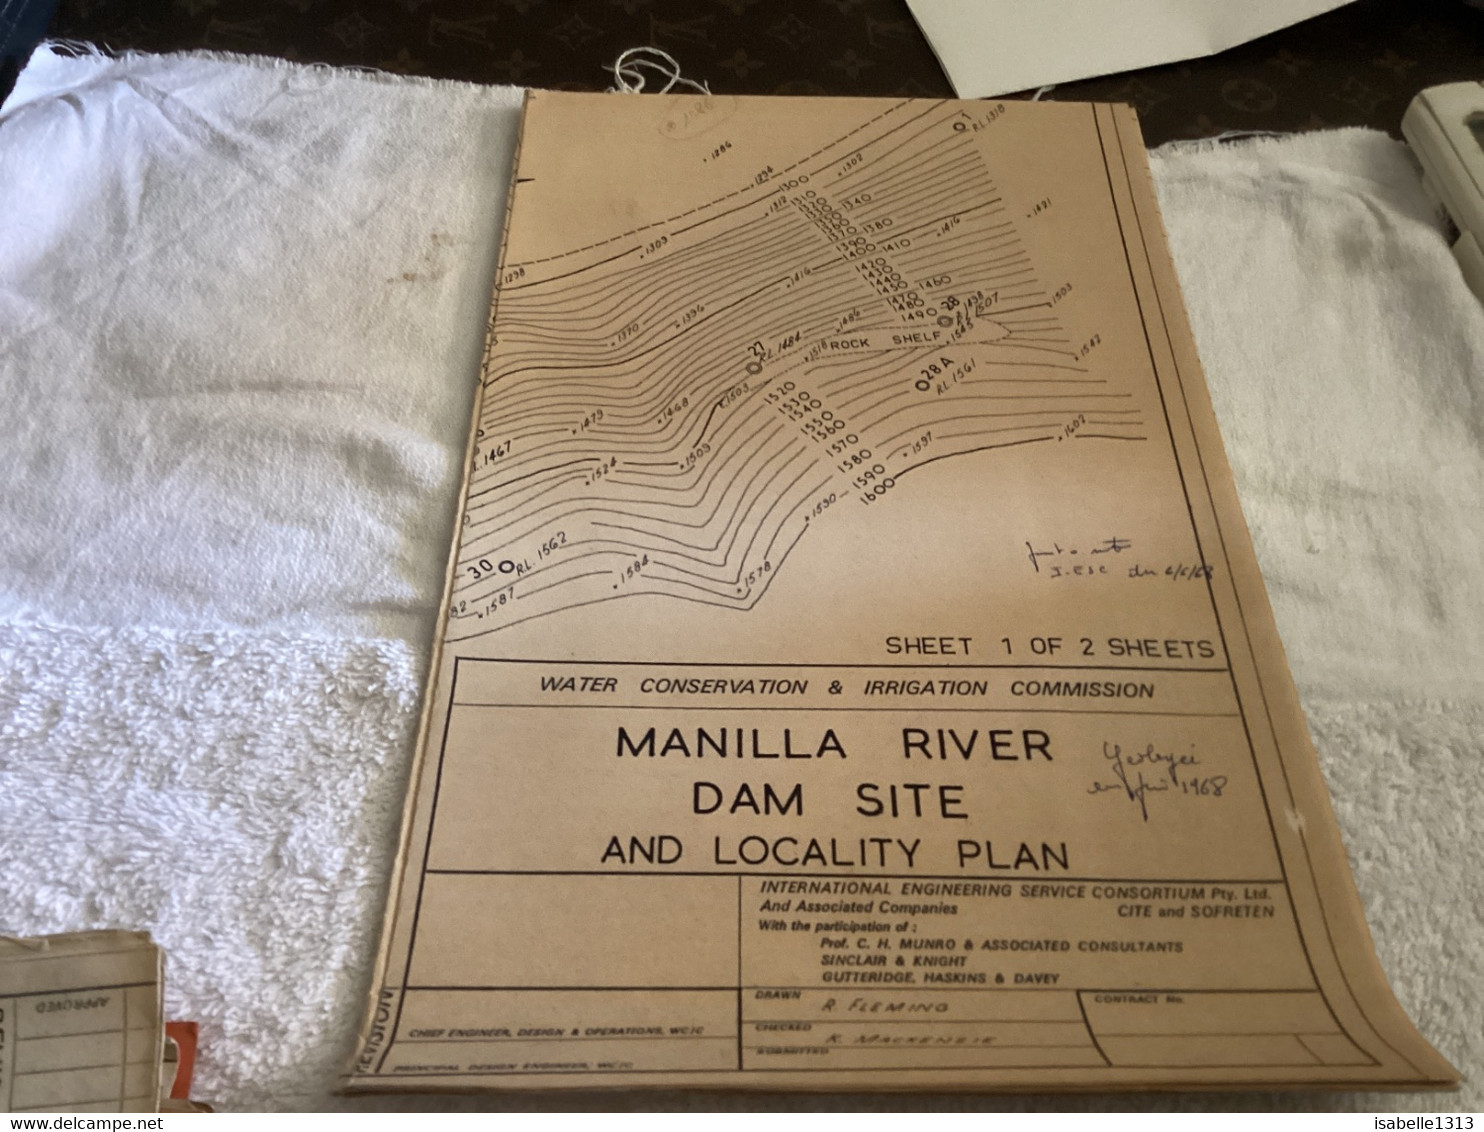 WATER CONSERVATION & IRRIGATION COMMISSION MANILLA RIVER UPSTREAM SITE FILL TYPE DAM. LAYOUT AND CROSS SECTIONS - Public Works